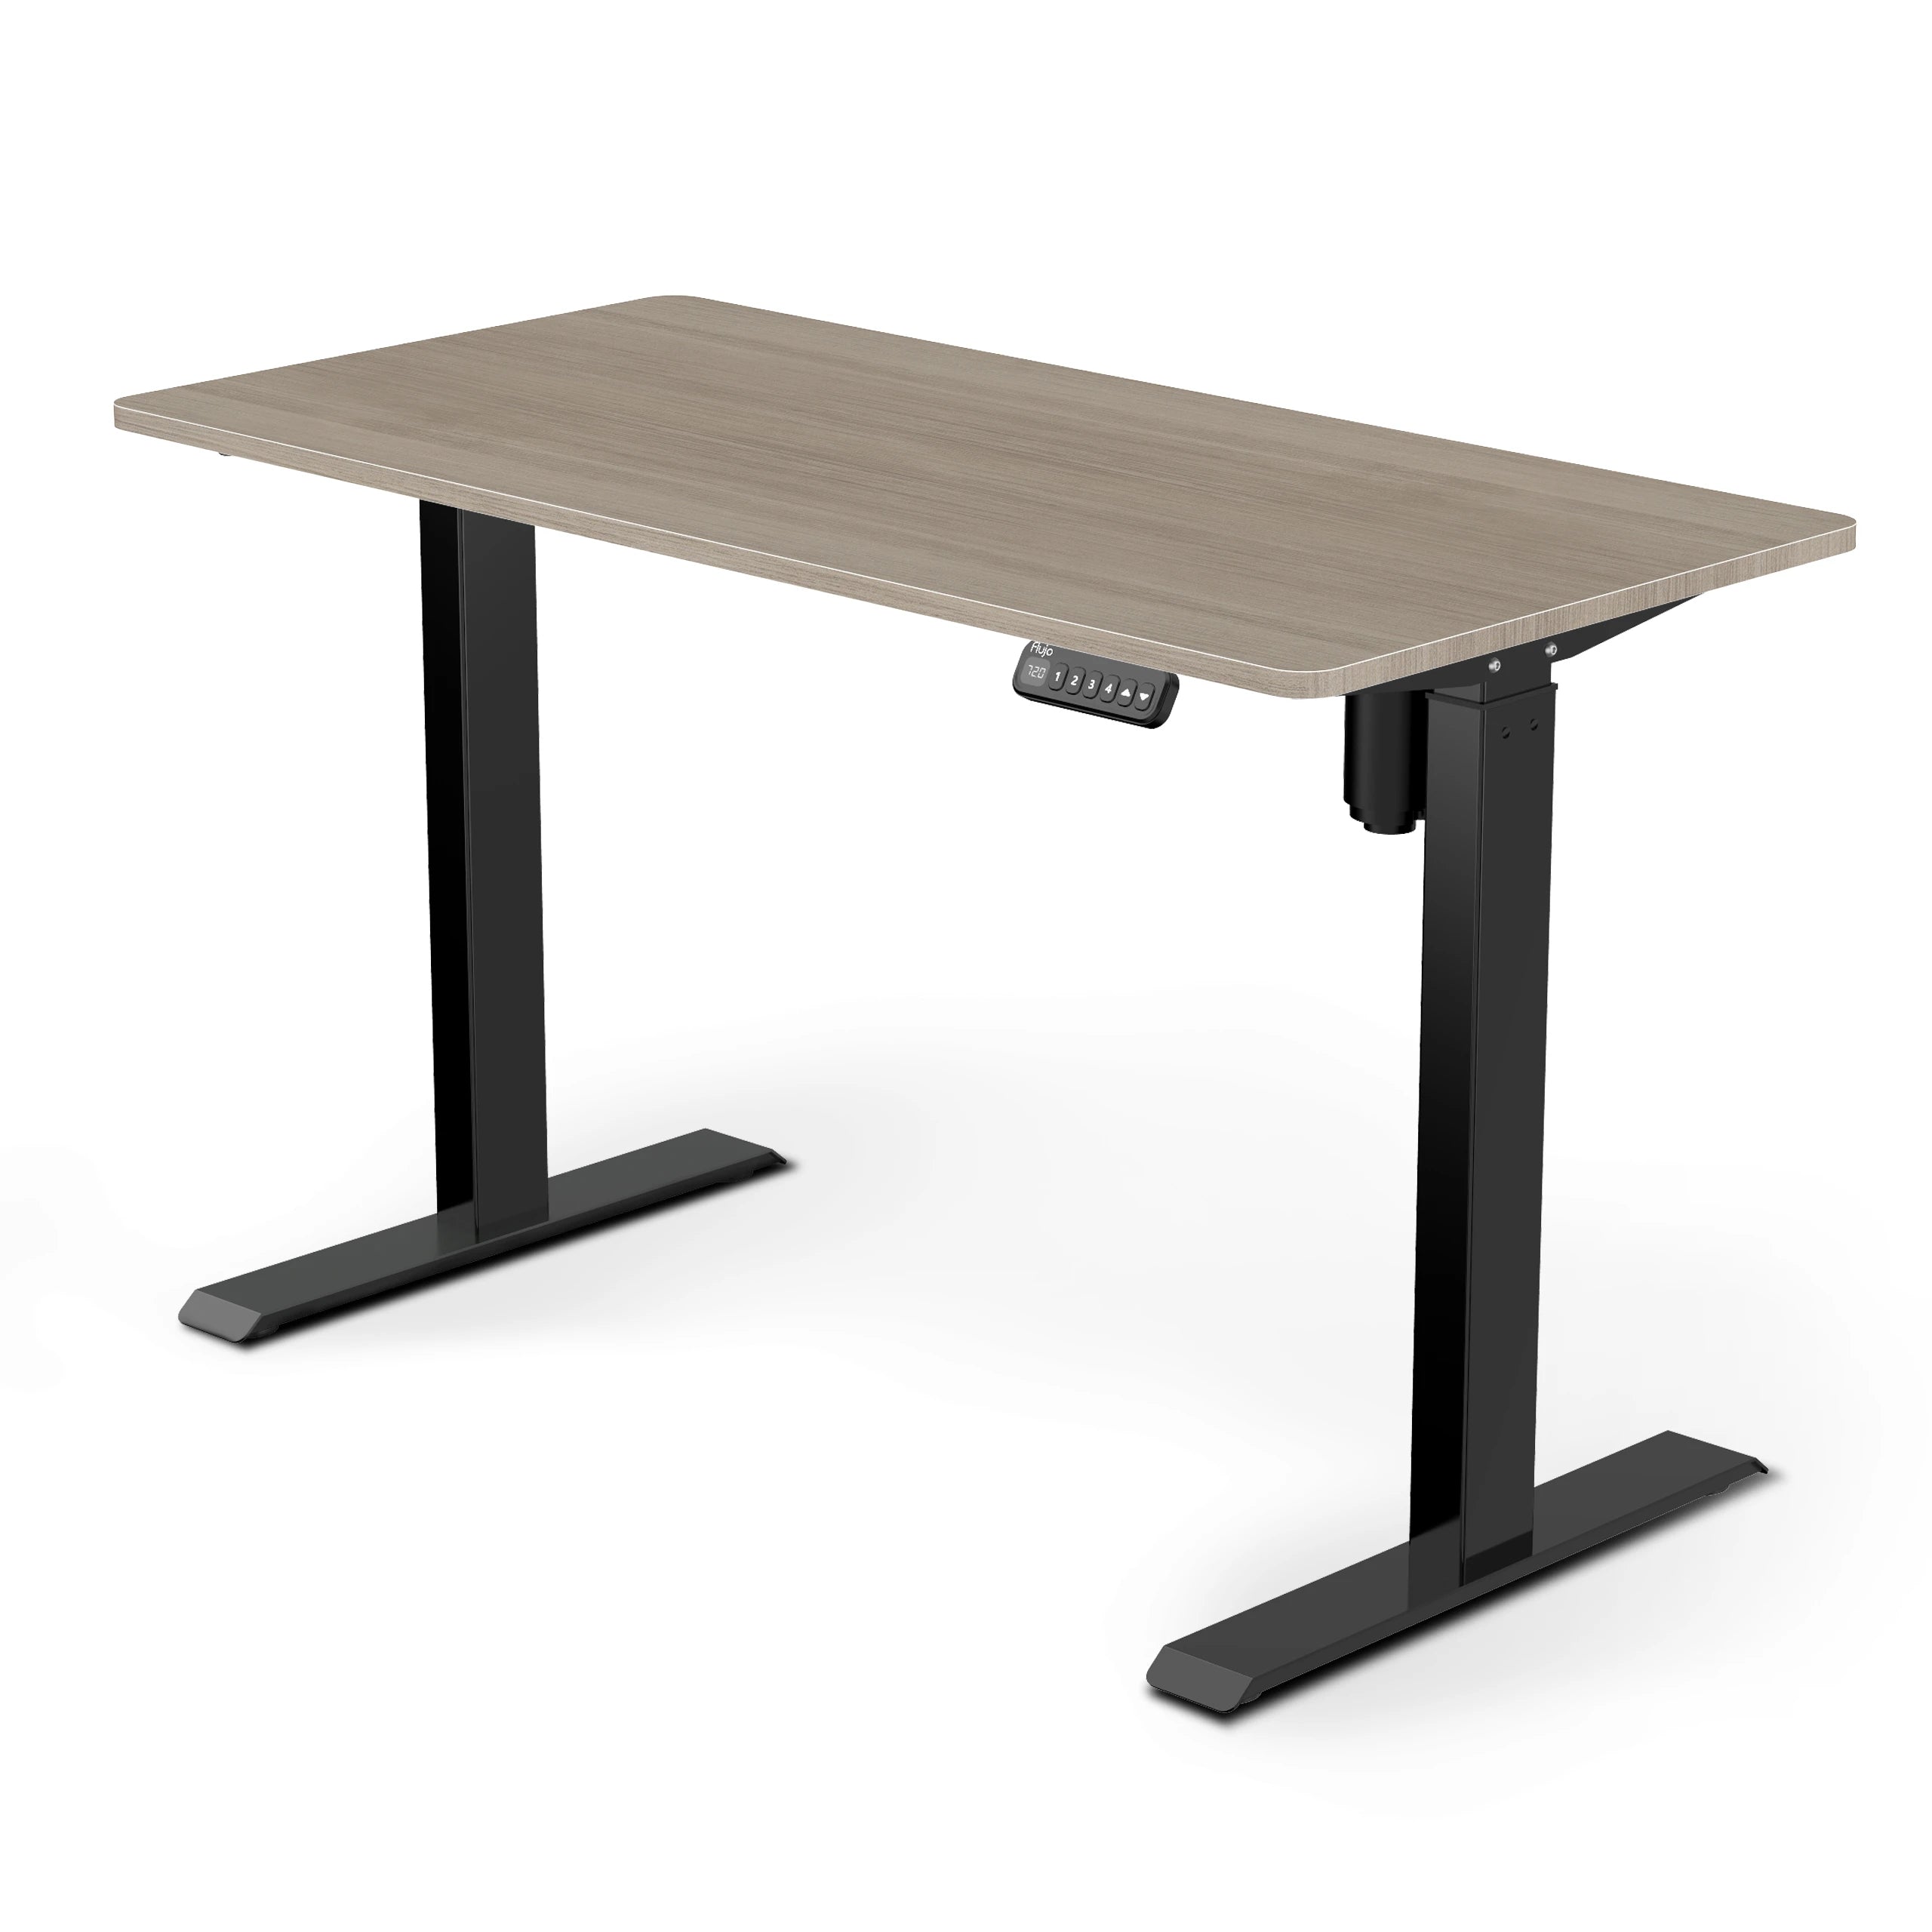 SmarTrax Ergonomic Standing Desk featuring a Beirut wood finish and black frame, complete with programmable height settings for a comfortable standing work experience.